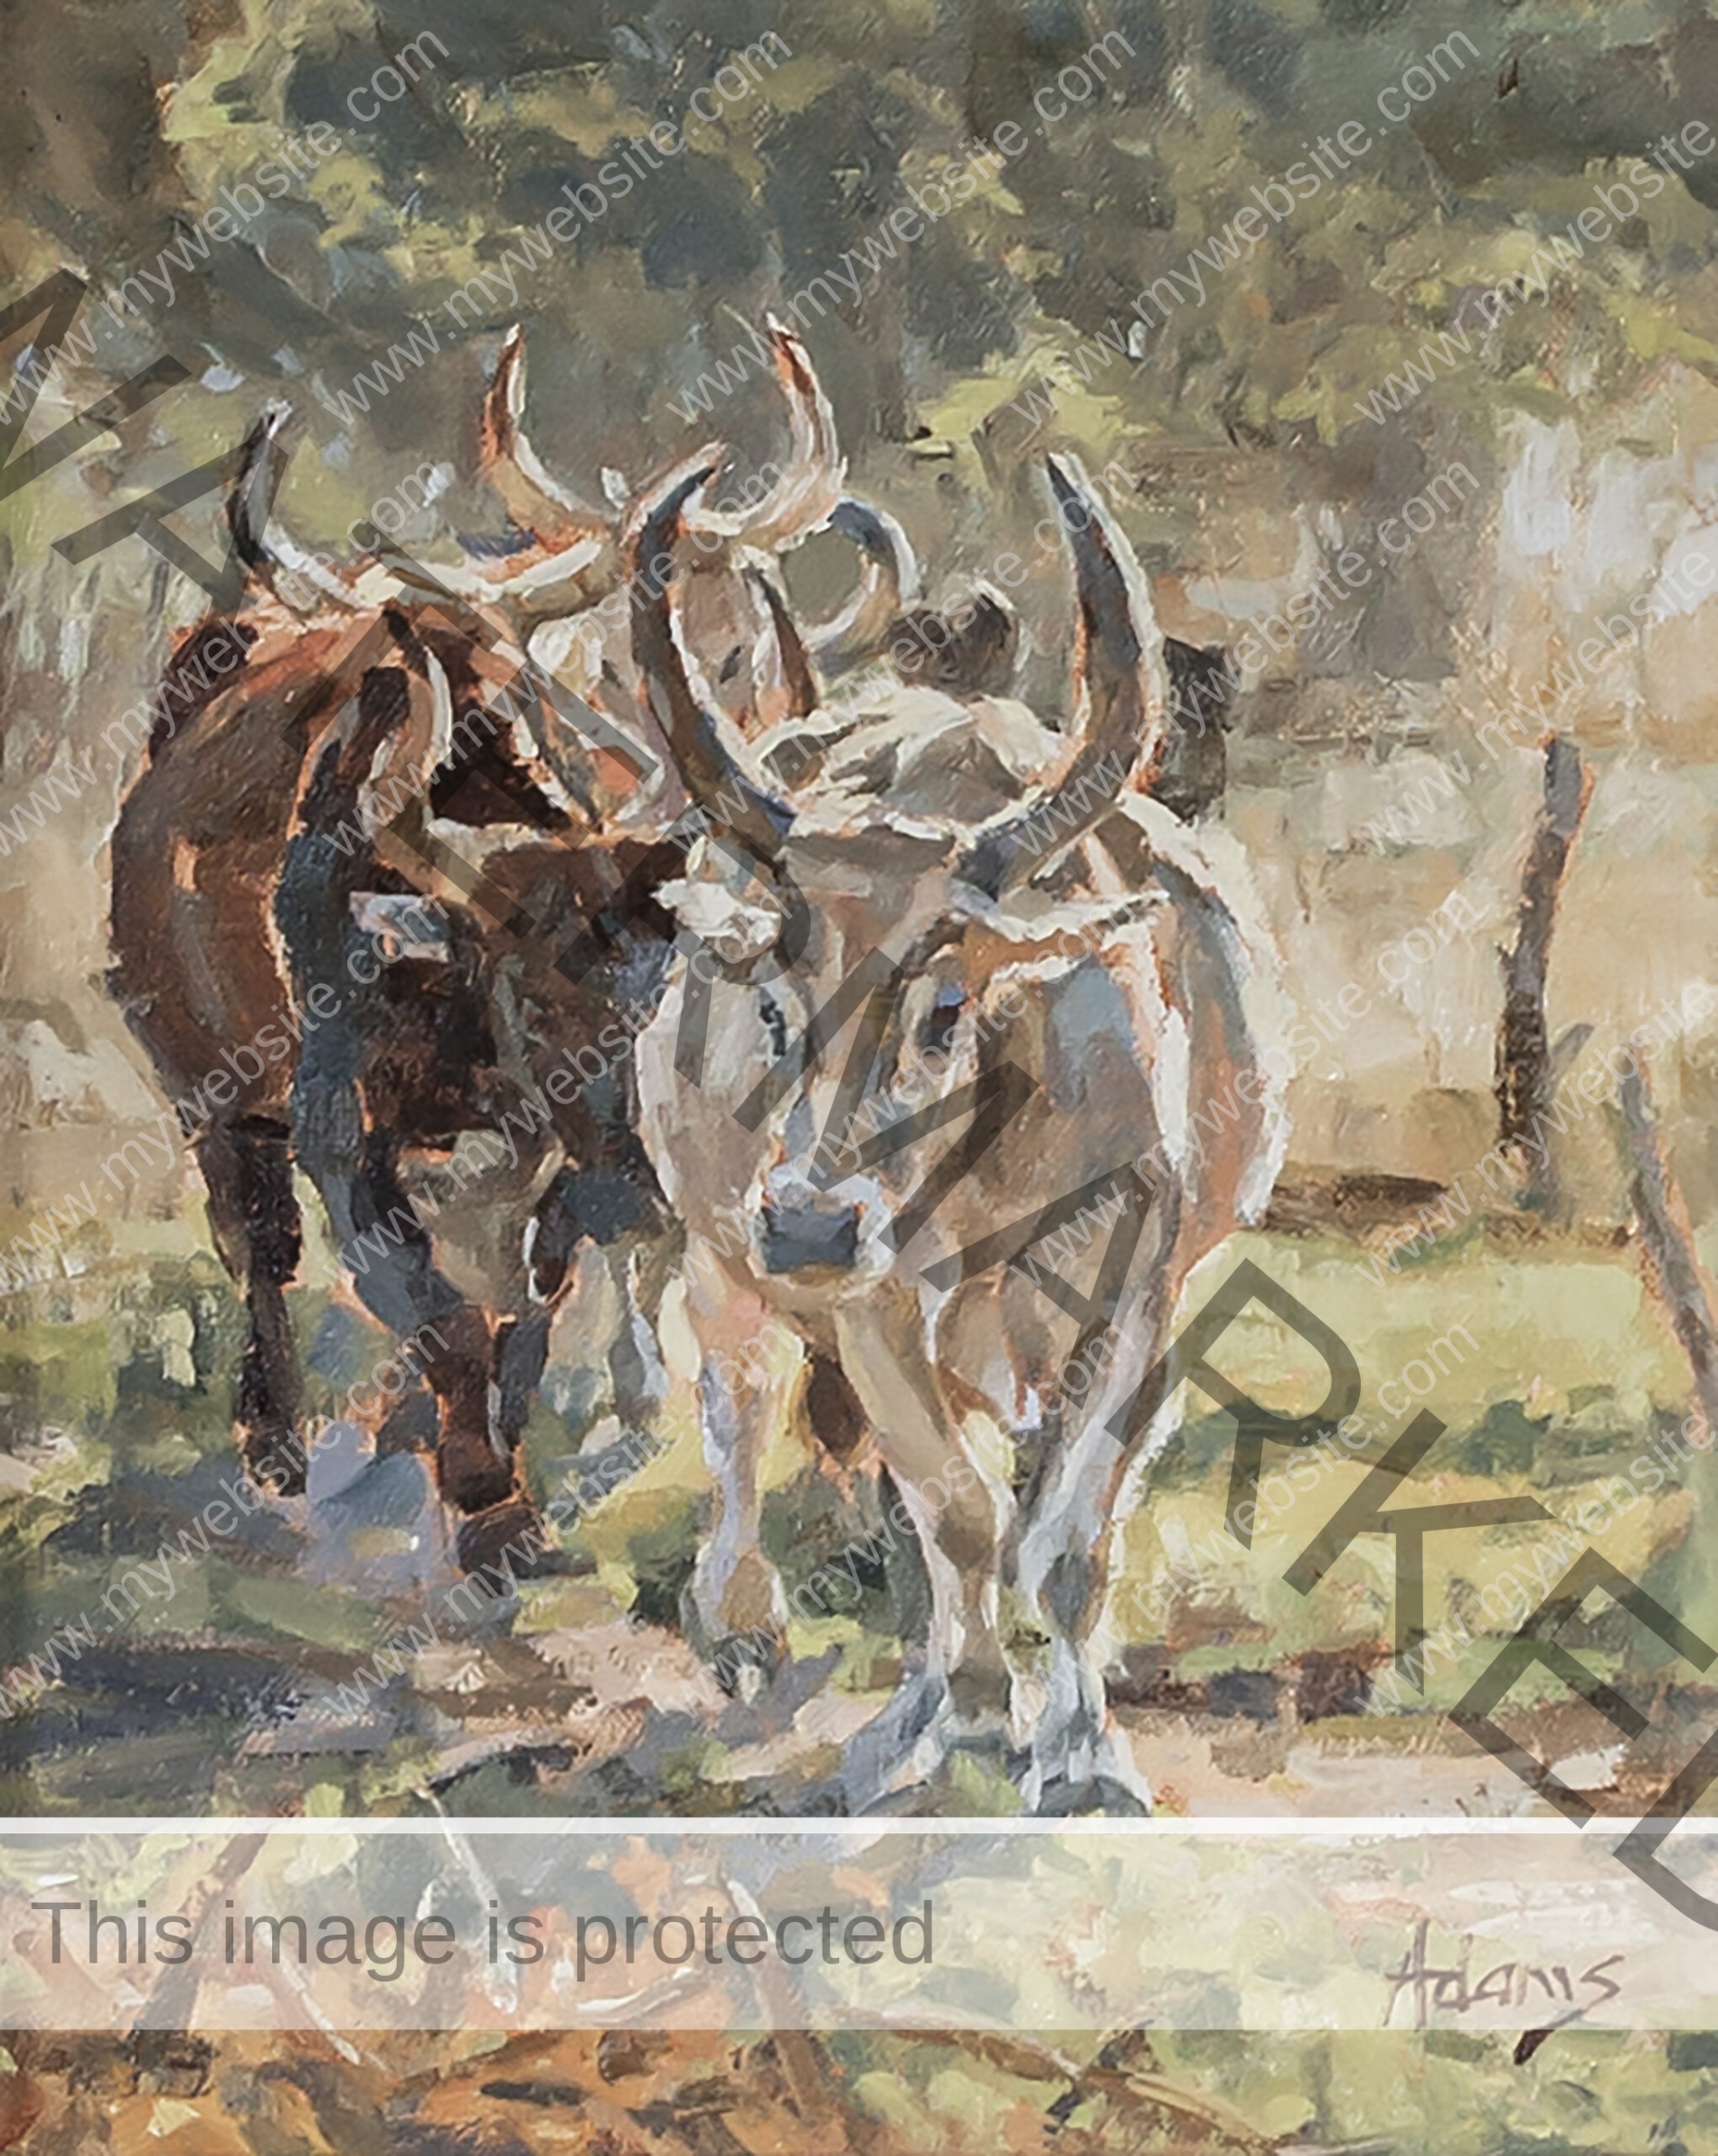 Costa Rican cow painting by Susan Adams, featuring two cows walking in a field bathed in soft afternoon sunlight. It's painted in an impressionist style.